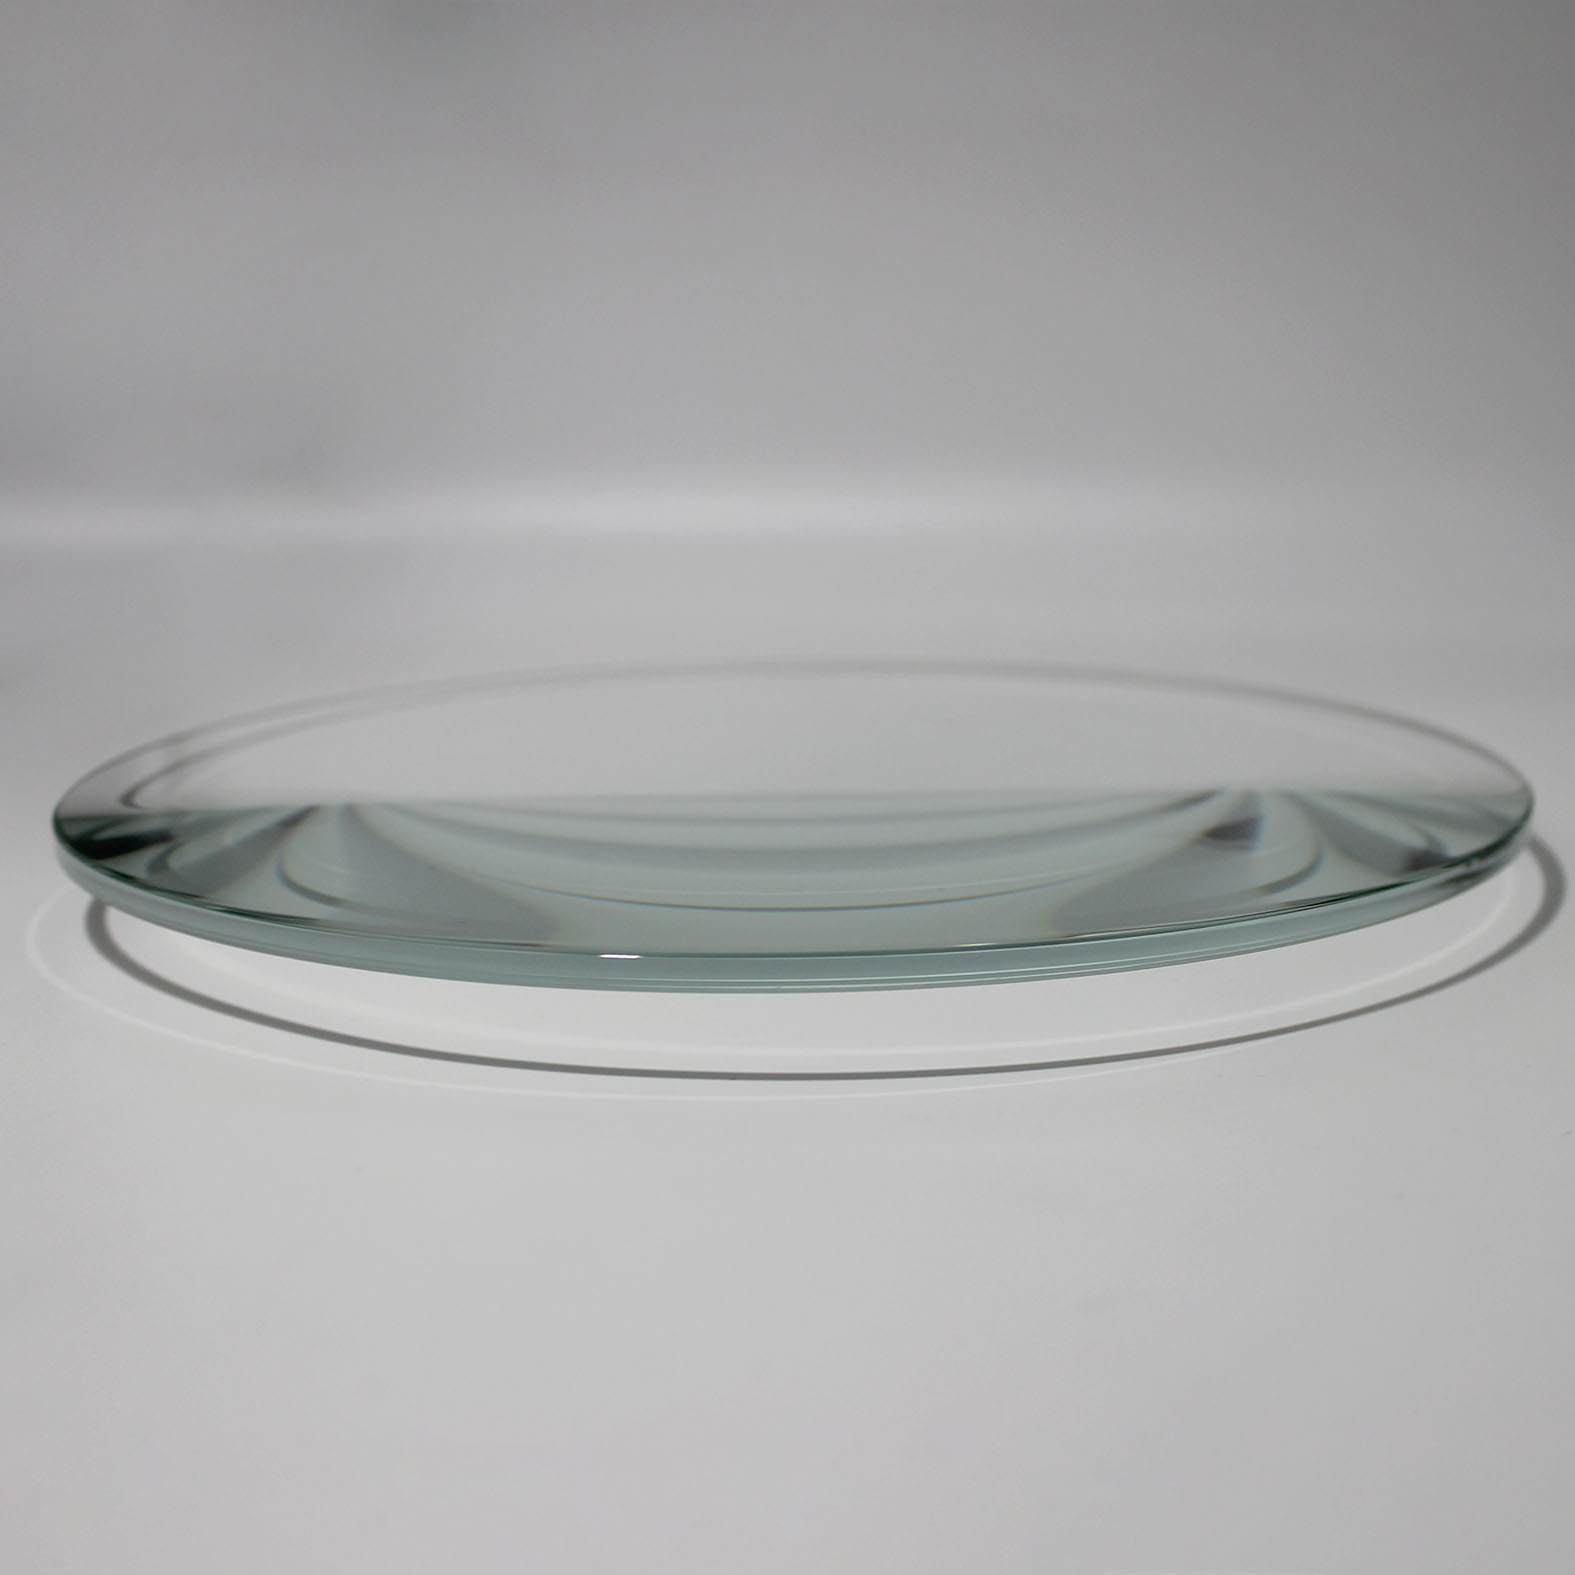 Factory Customized Optical Glass Magnifying Plano Convex Lens